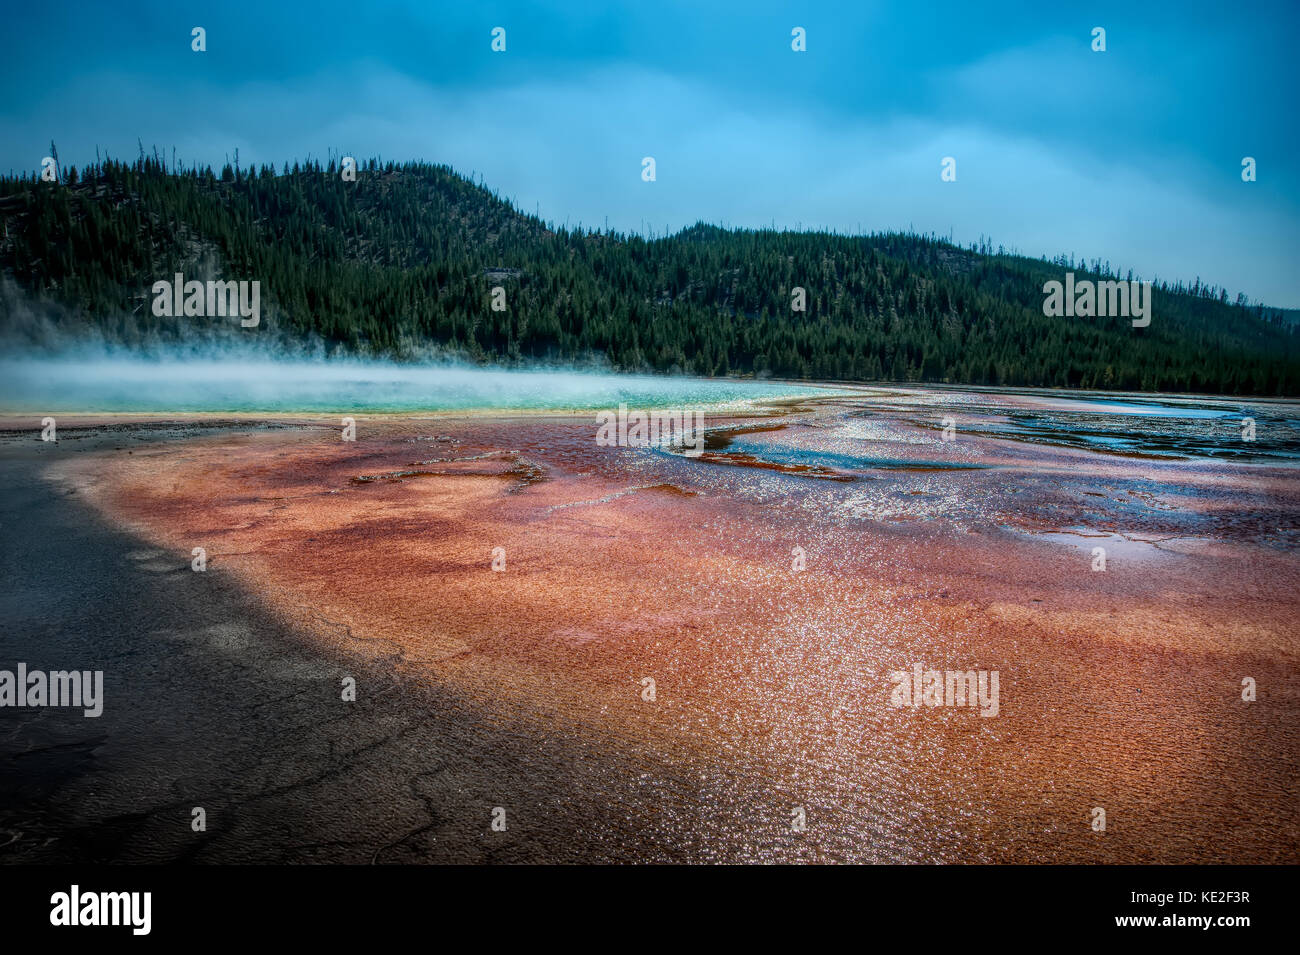 August 22, 2017 - Grand Prismatic Spring in Yellowstone National Park Stock Photo